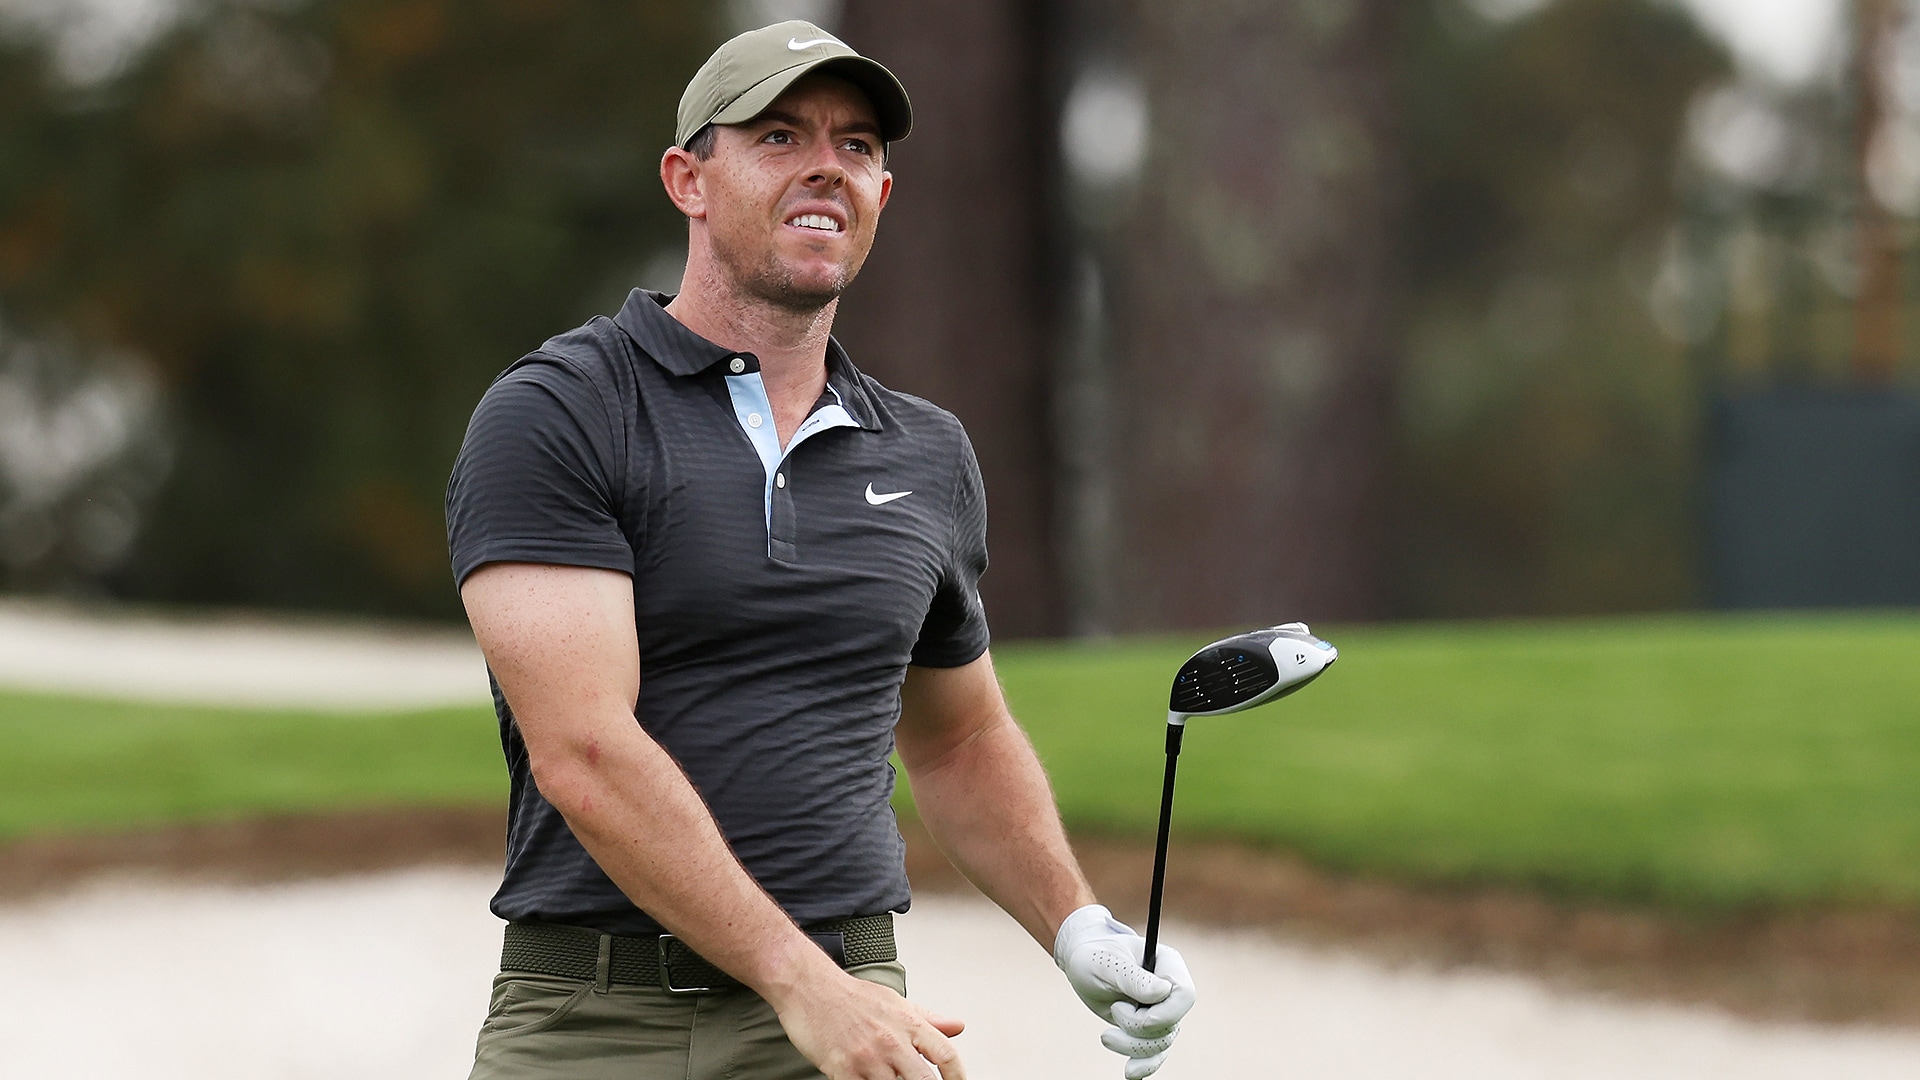 They say Rory McIlroy will win a Masters, but Rory knows it’s actions, not words